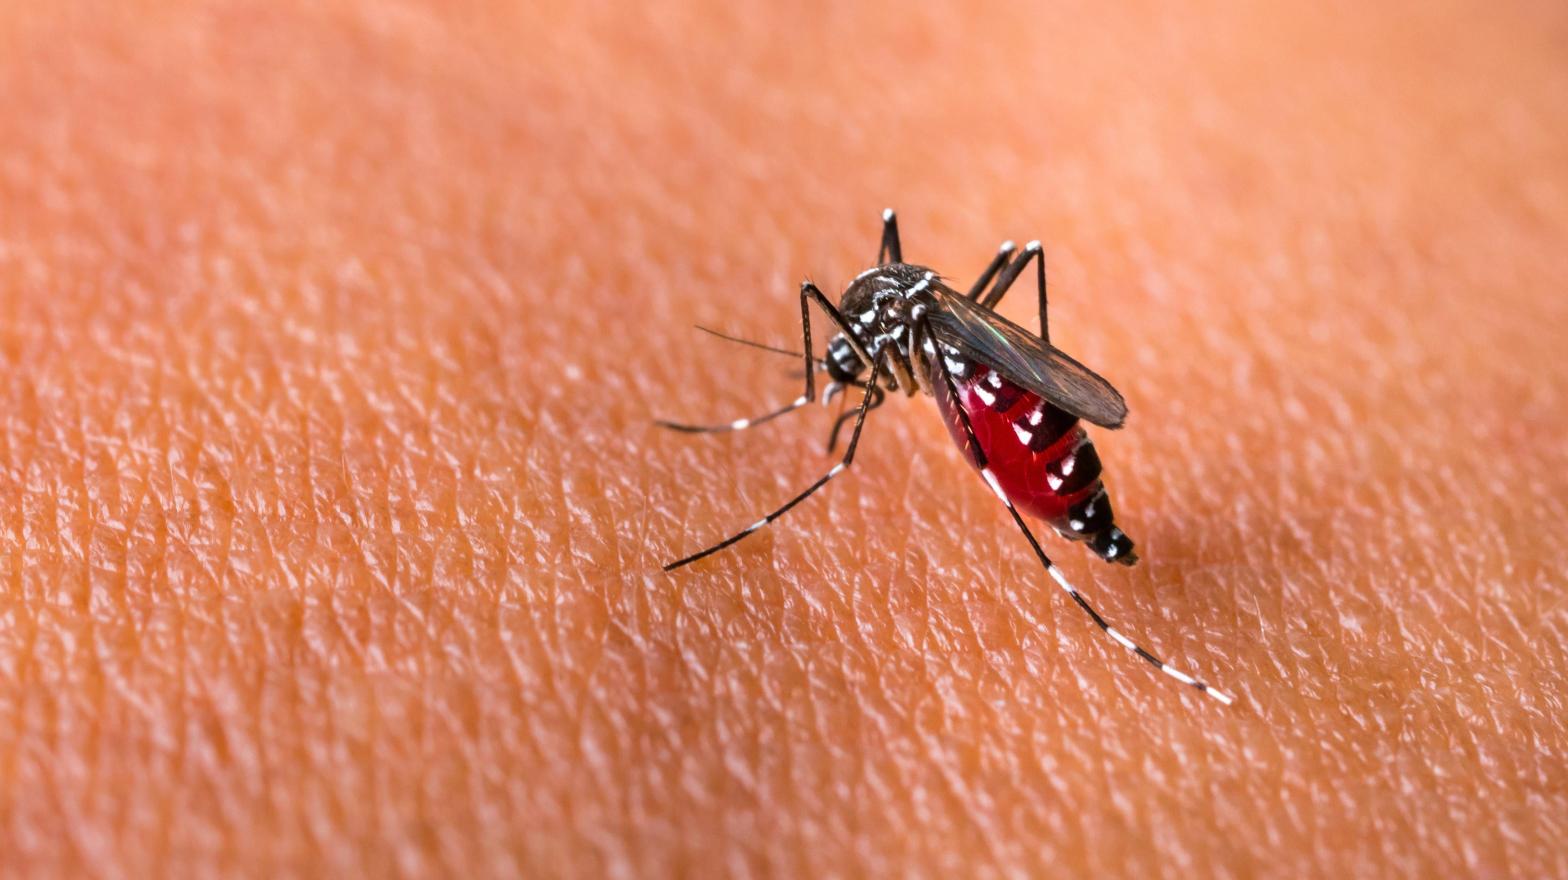 An Aedes aegypti mosquito. (Image: Shutterstock, Shutterstock)